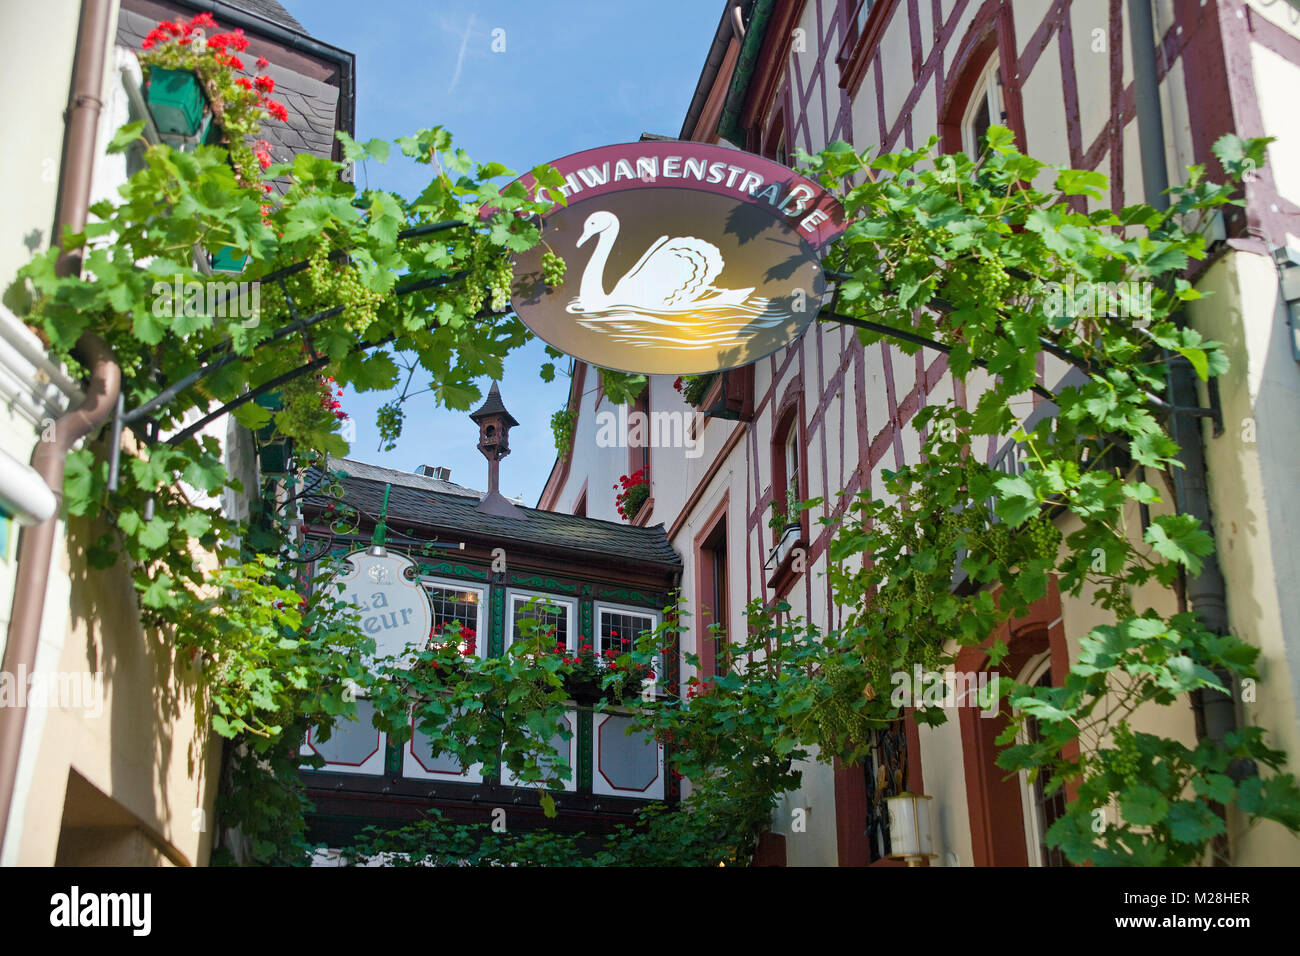 Swan street, alley at historic center, old town of wine village Bernkastel-Kues, Moselle river, Rhineland-Palatinate, Germany, Europe Stock Photo